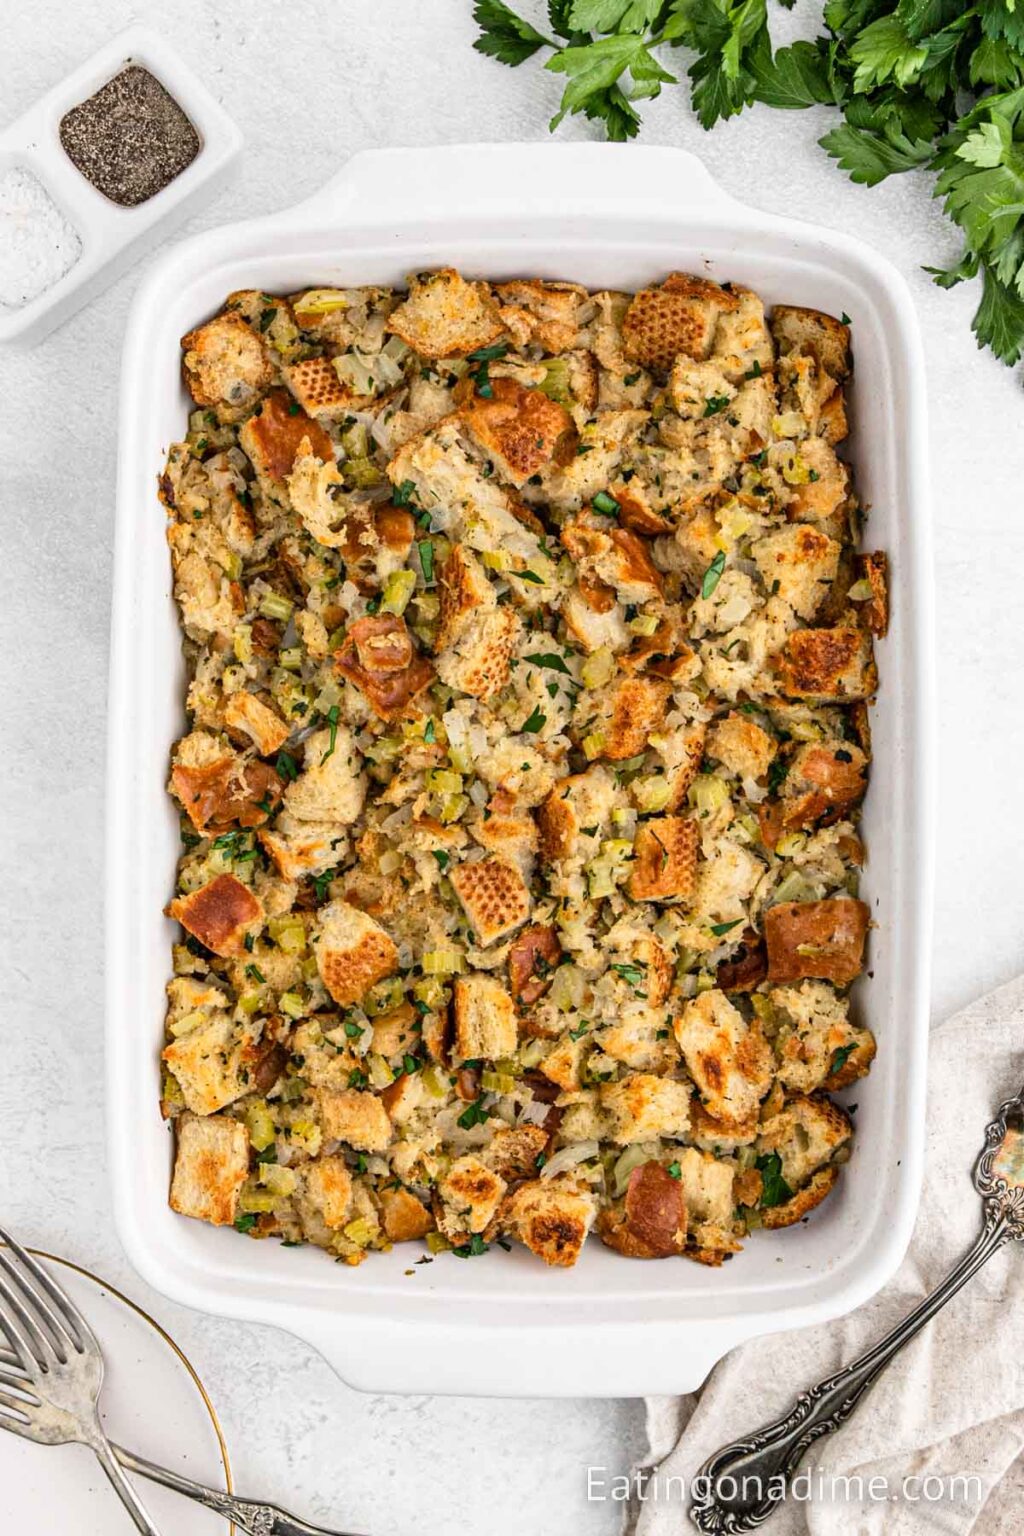 Easy Stuffing Recipe that Anyone can Make